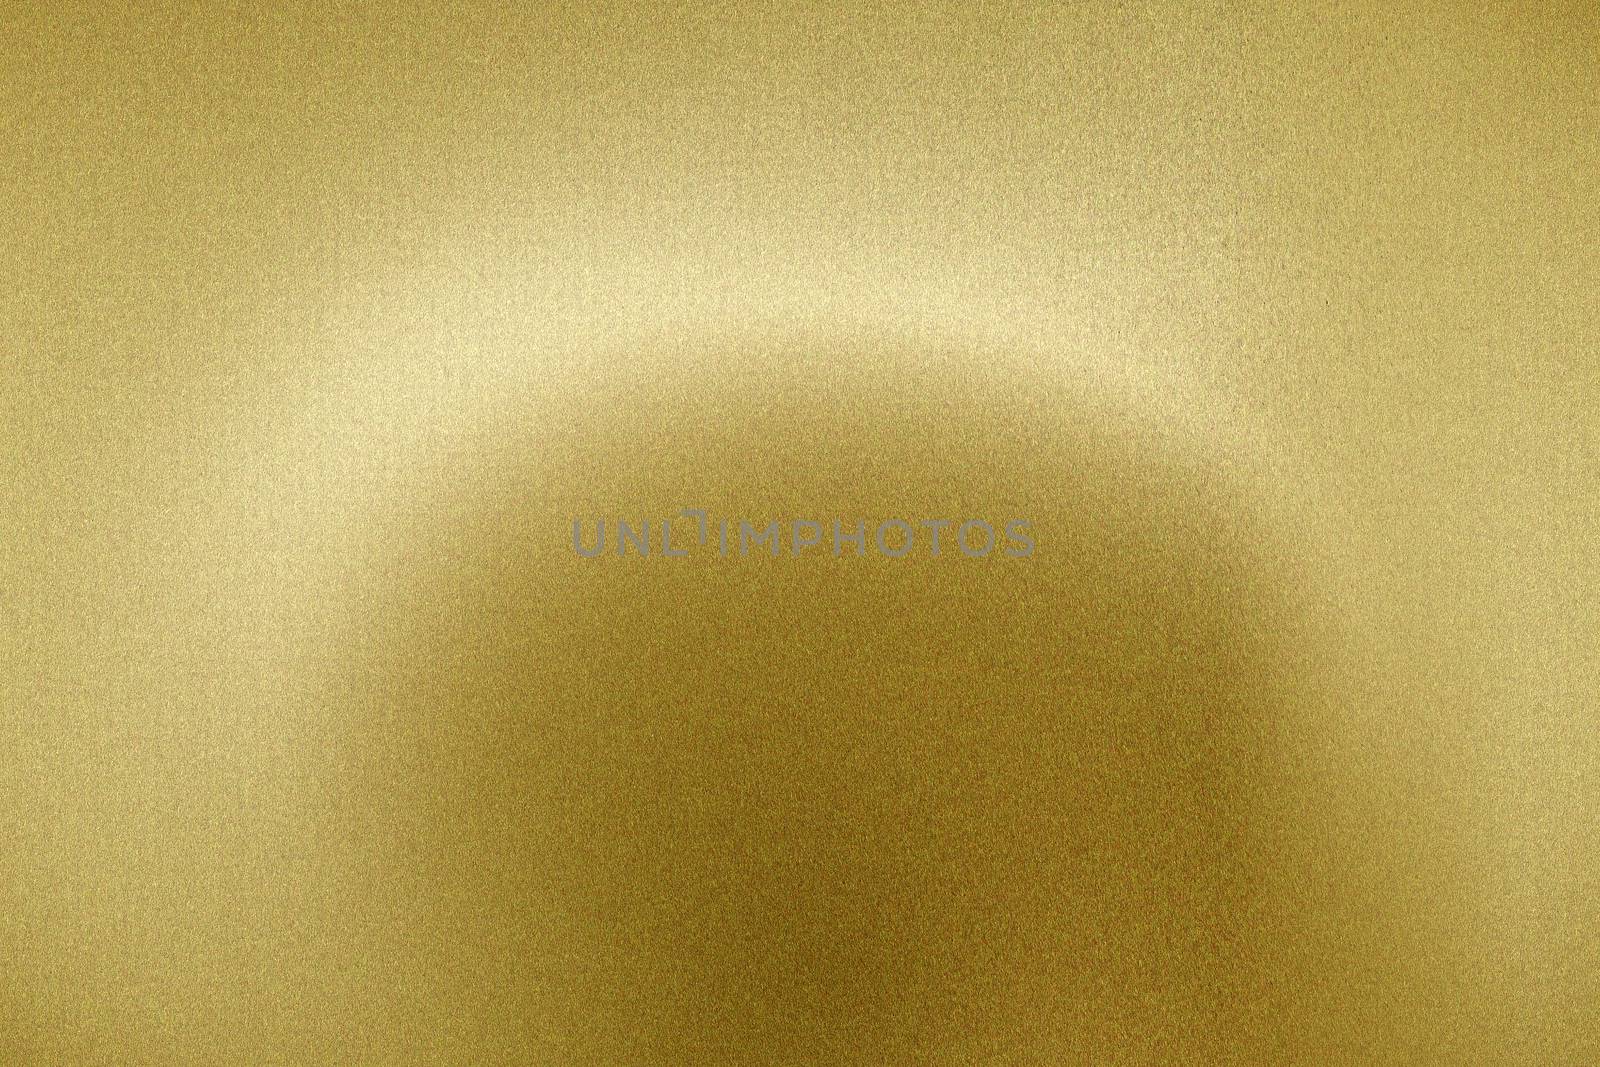 Light shining on brushed gold metal panel, abstract texture background by mouu007